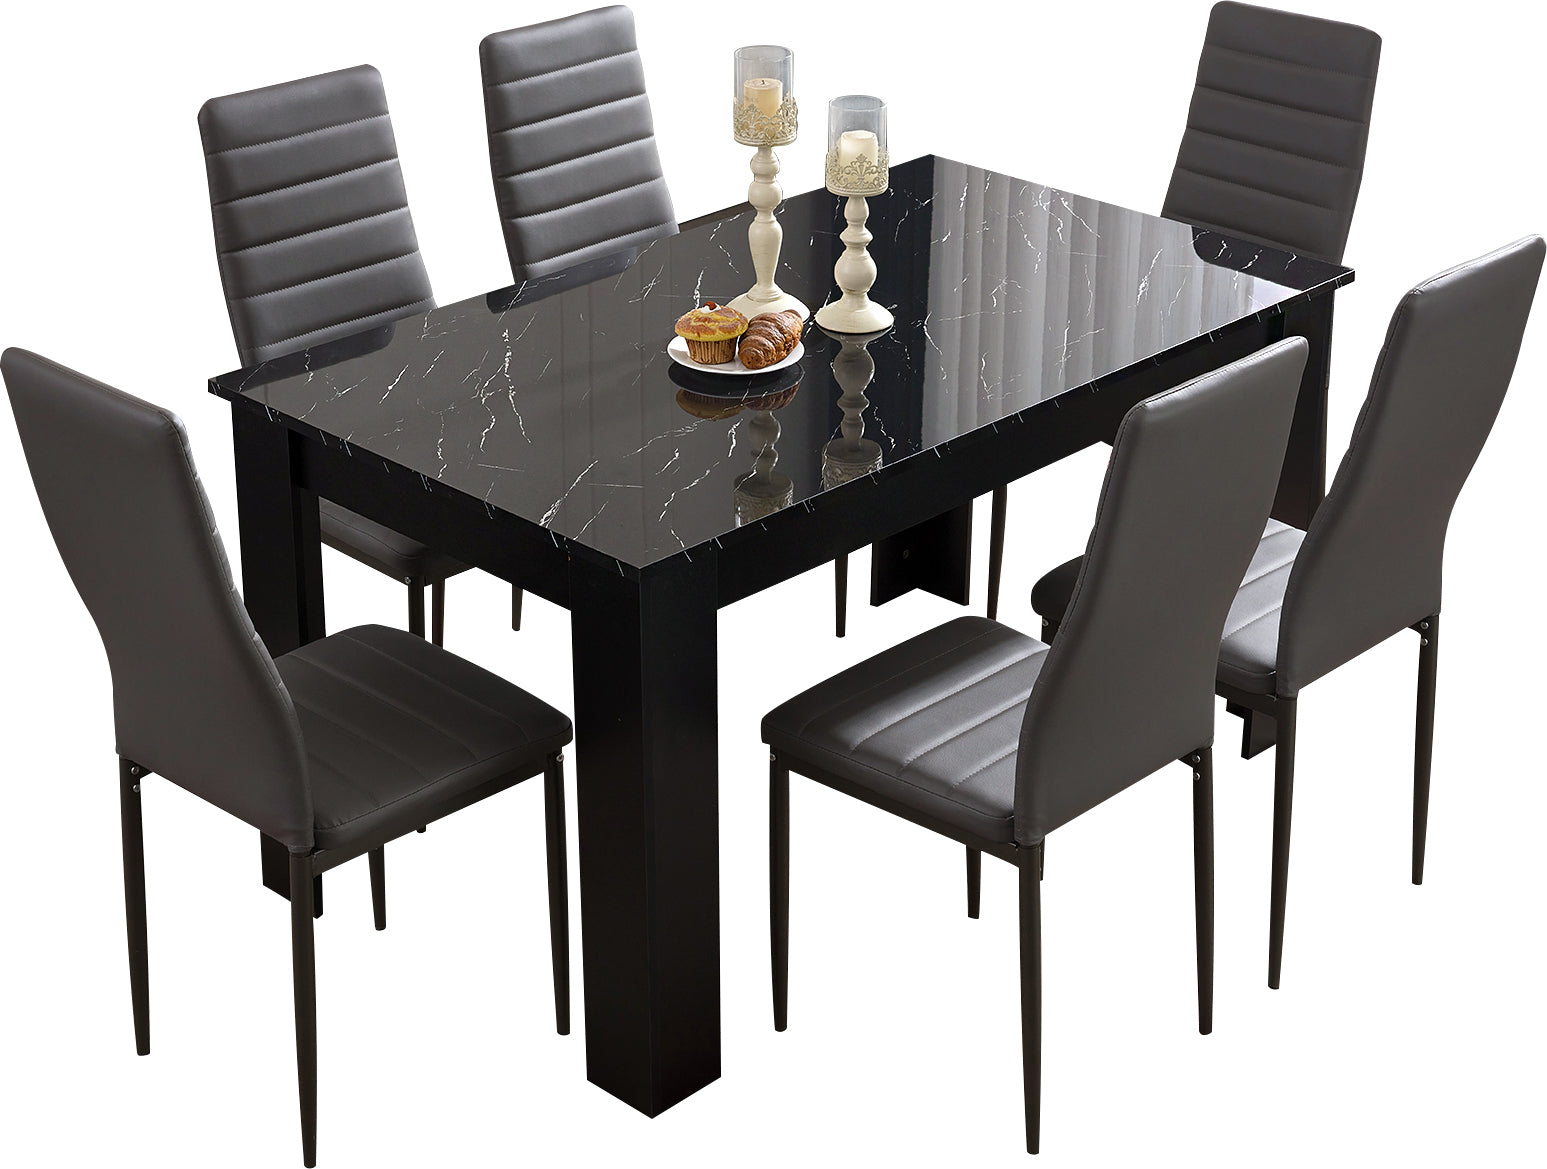 space saving dining table with chairs